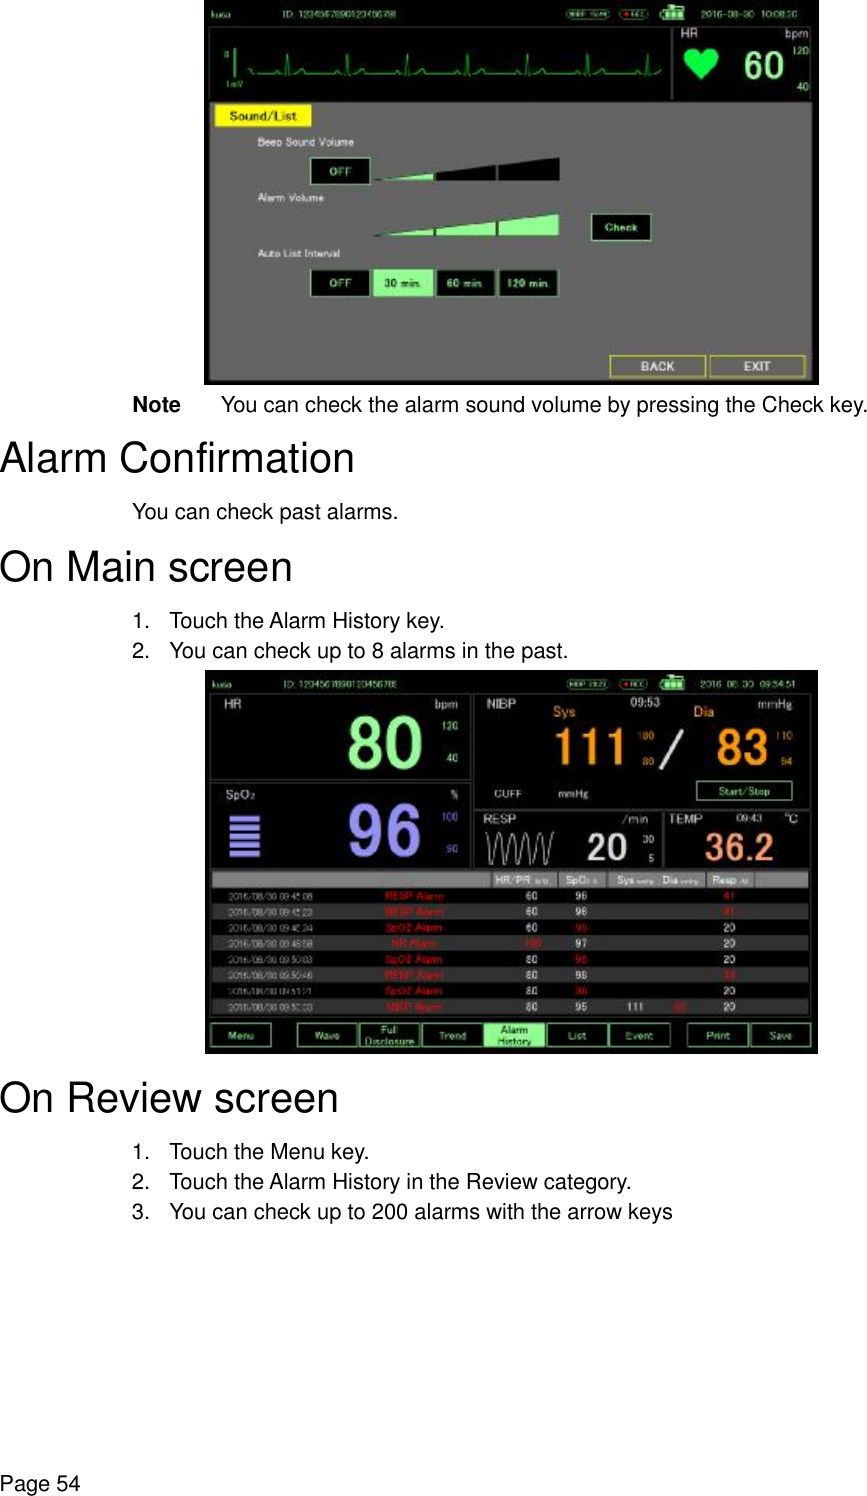    Page 54  Note You can check the alarm sound volume by pressing the Check key. Alarm Confirmation You can check past alarms. On Main screen 1. Touch the Alarm History key. 2. You can check up to 8 alarms in the past.  On Review screen 1. Touch the Menu key. 2. Touch the Alarm History in the Review category. 3. You can check up to 200 alarms with the arrow keys 